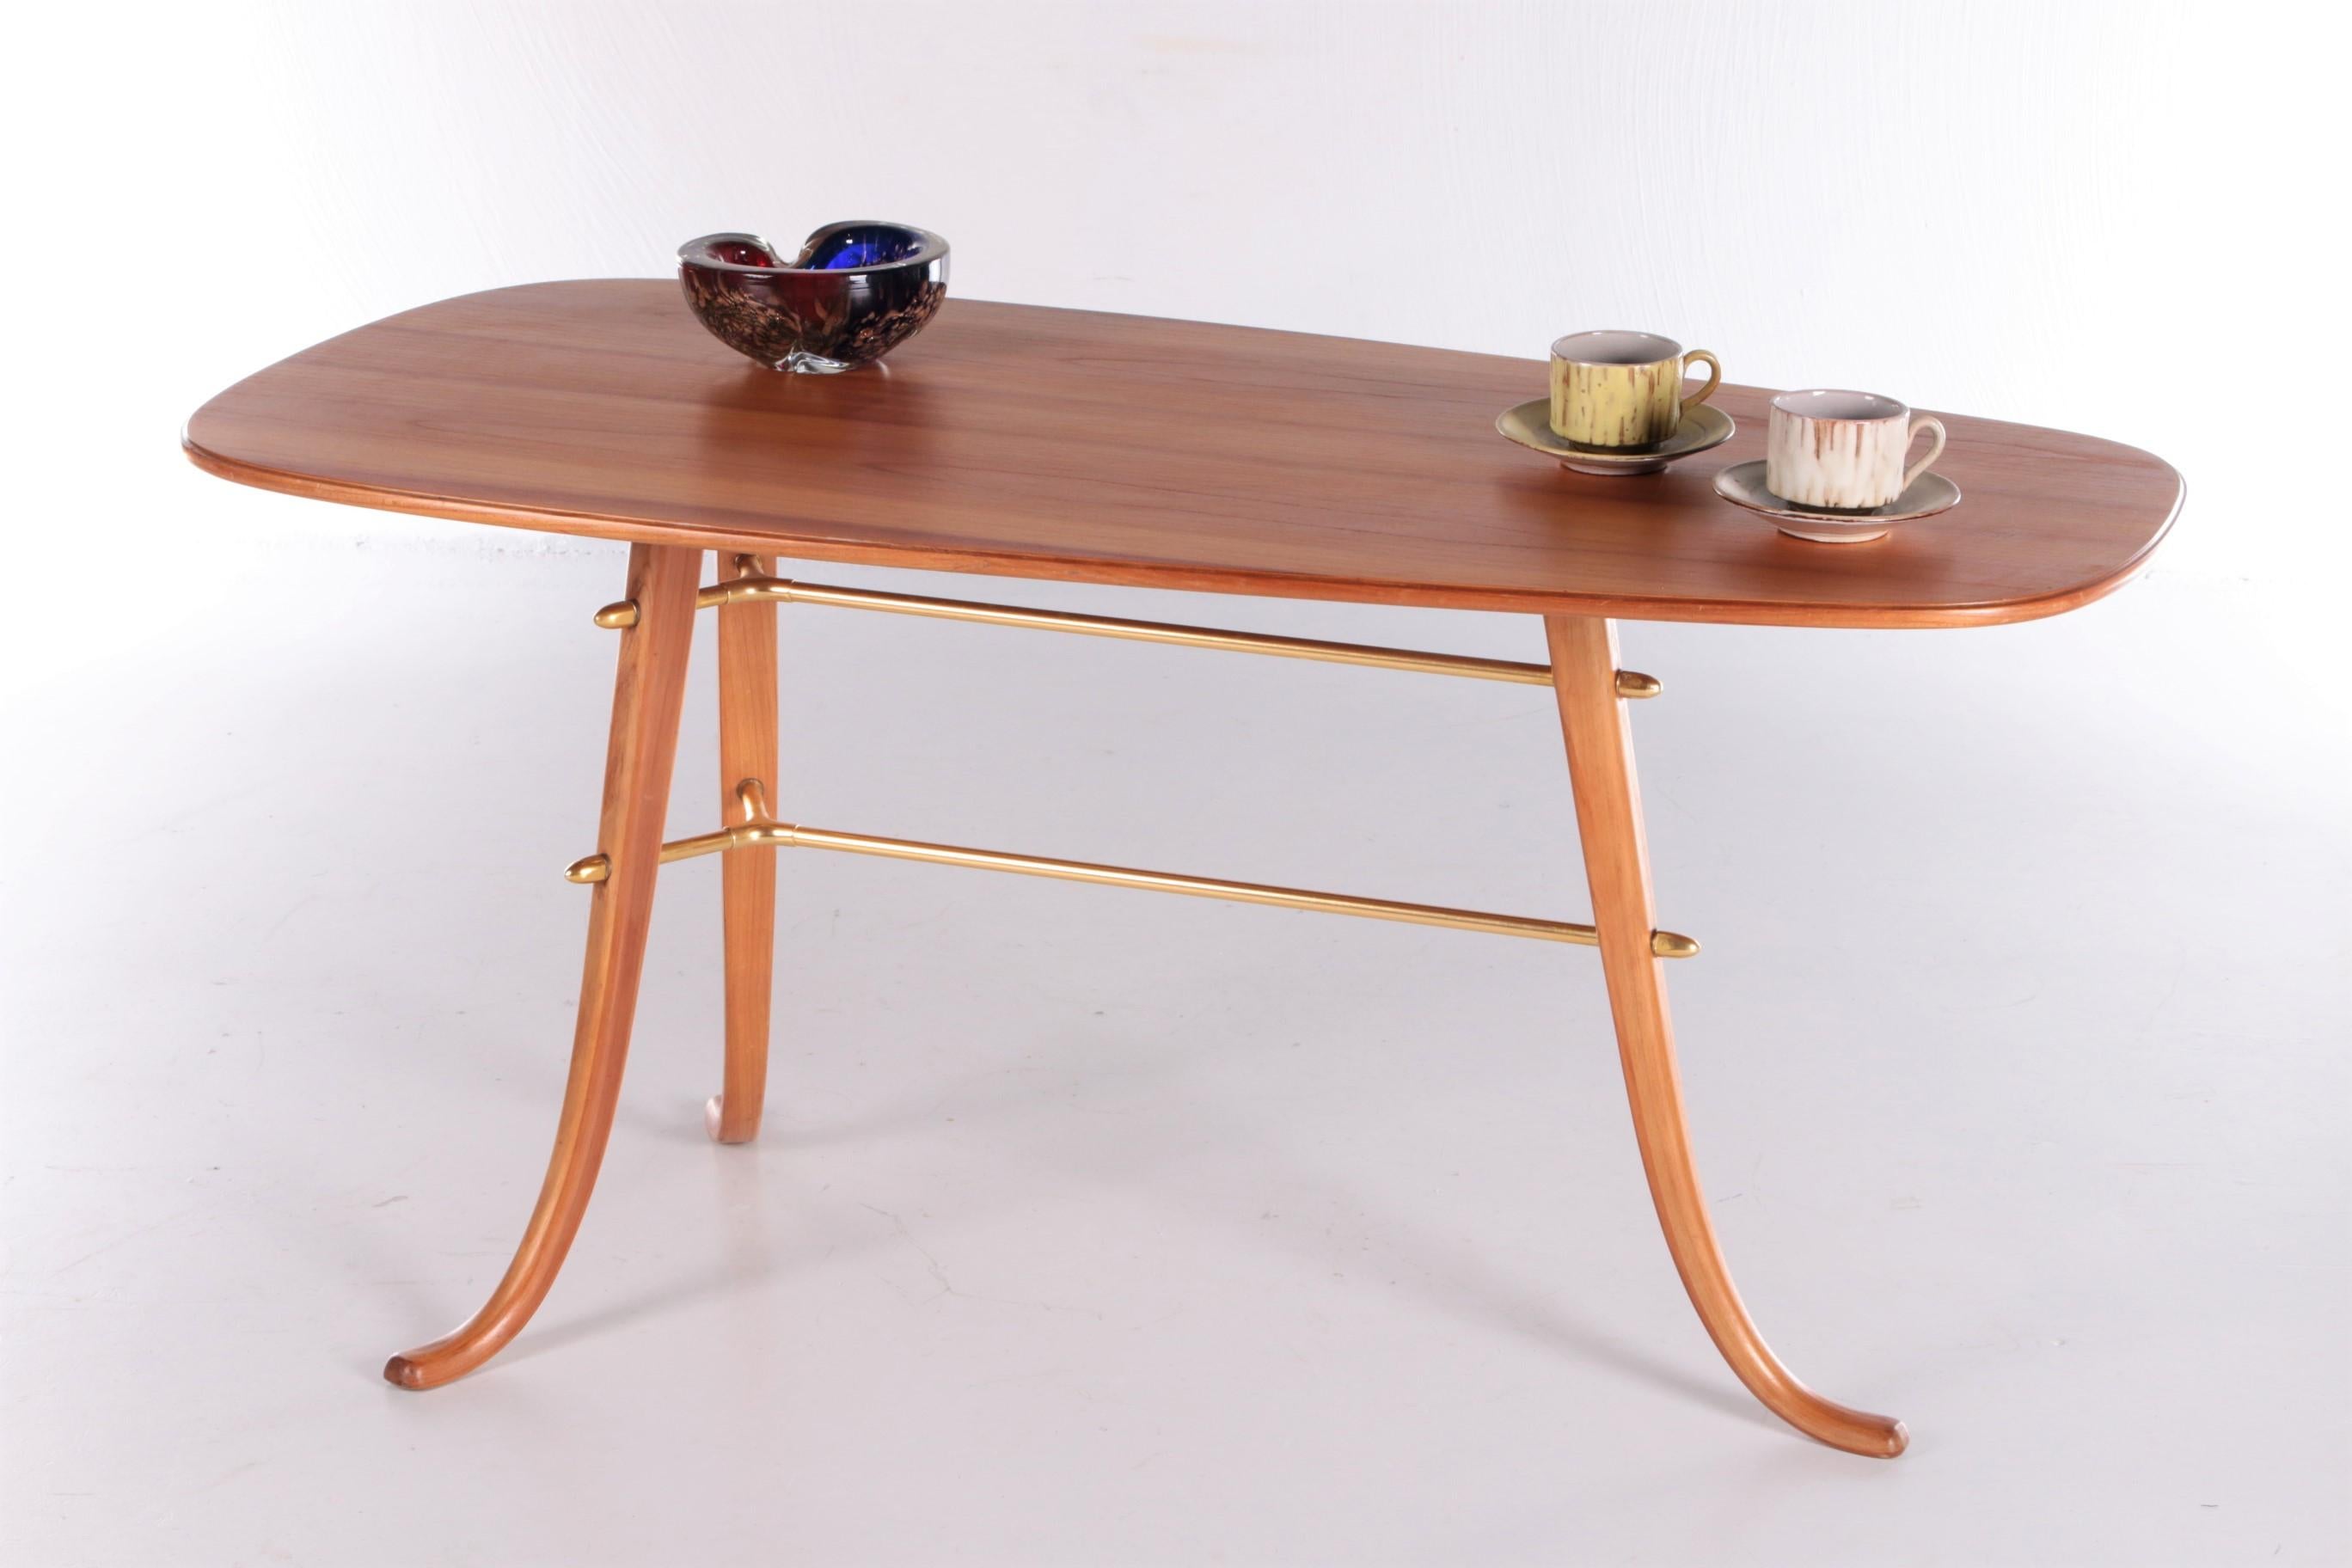 Scandinavian Modern Vintage Coffee Table with 3 Legs and Brass Details Scandinavia For Sale